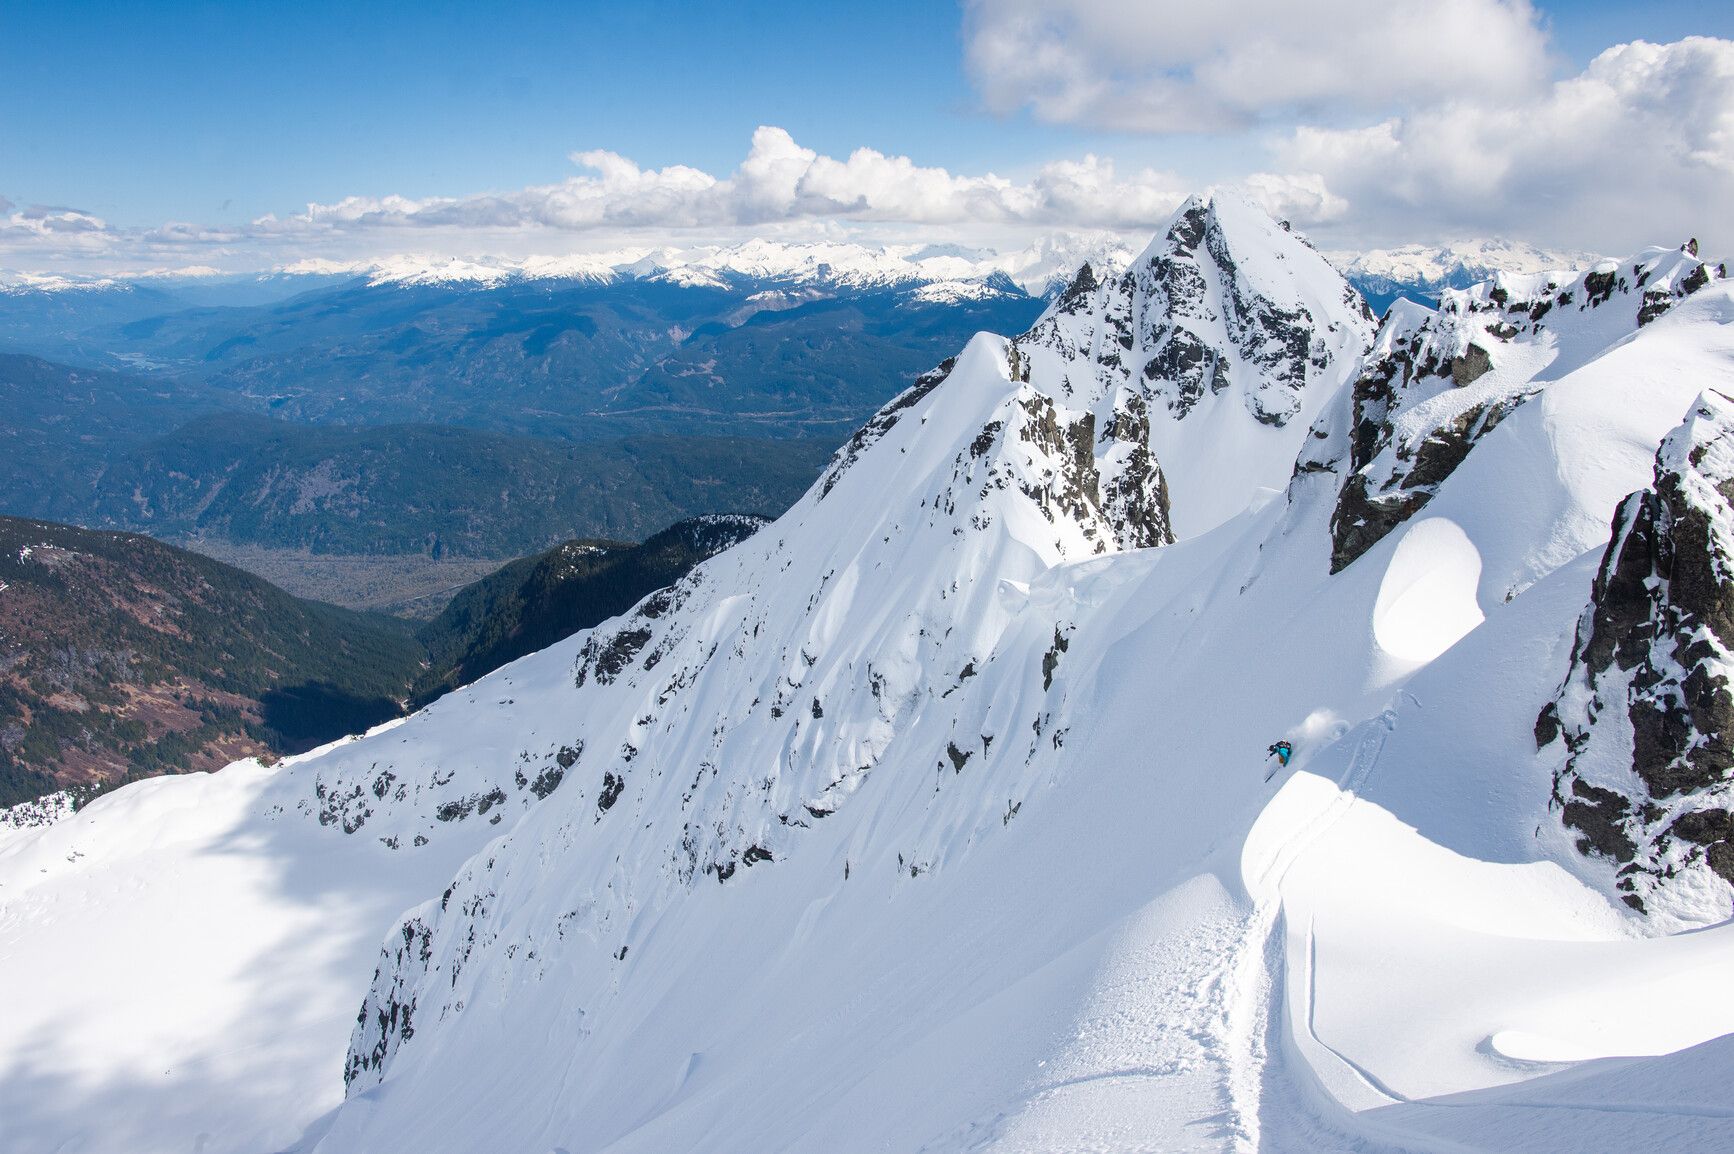 A backcountry skier on the face of a mountain. Tantalus Park.